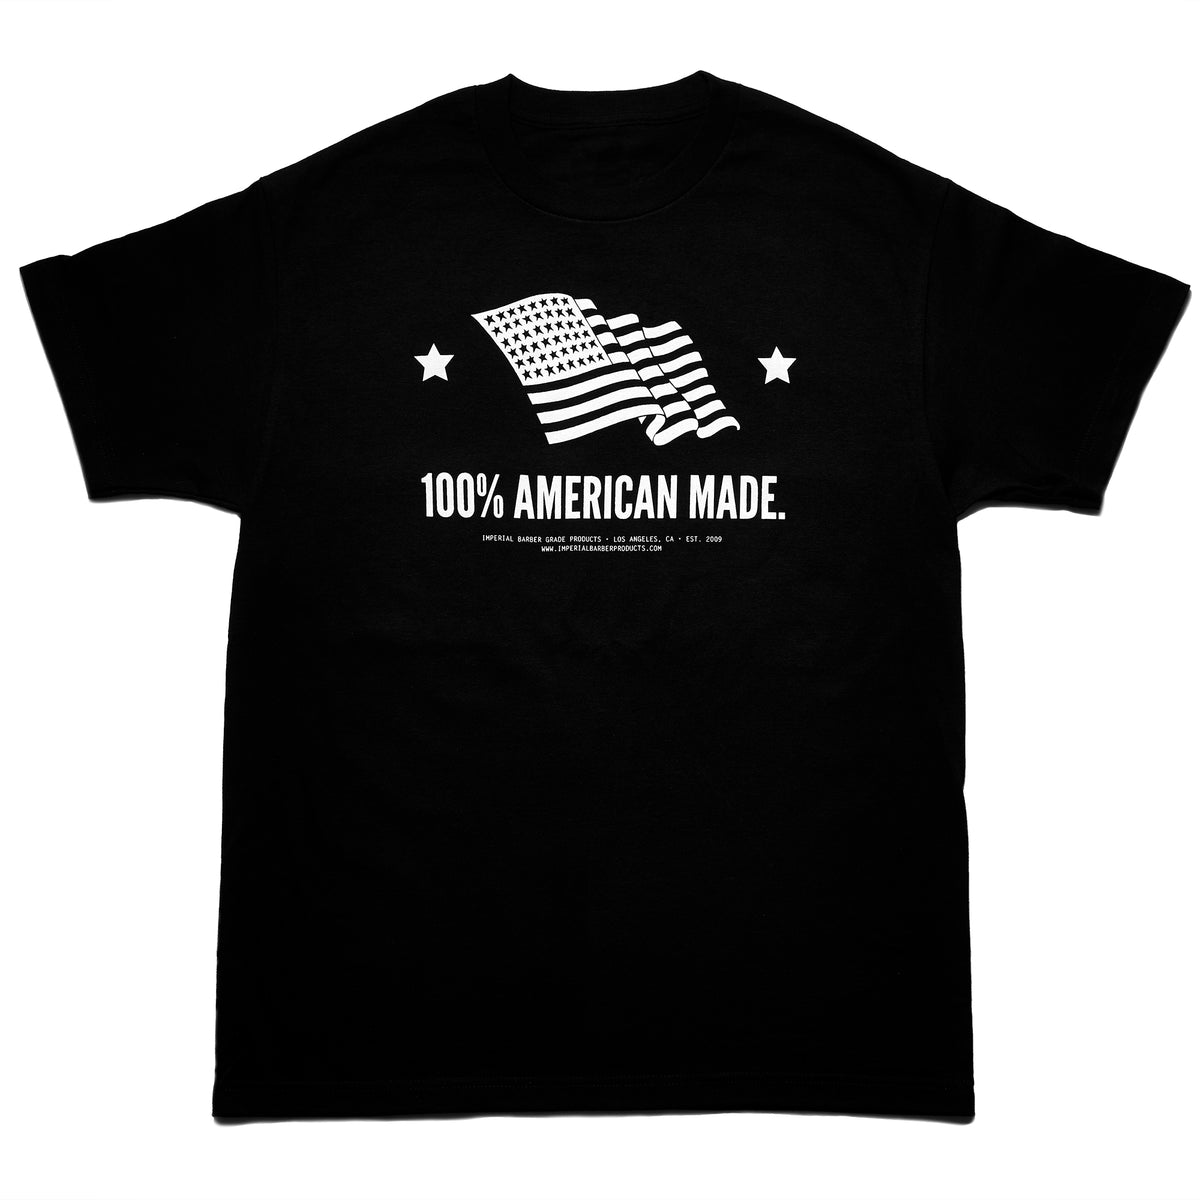 IMPERIAL 100% AMERICAN MADE T-SHIRT